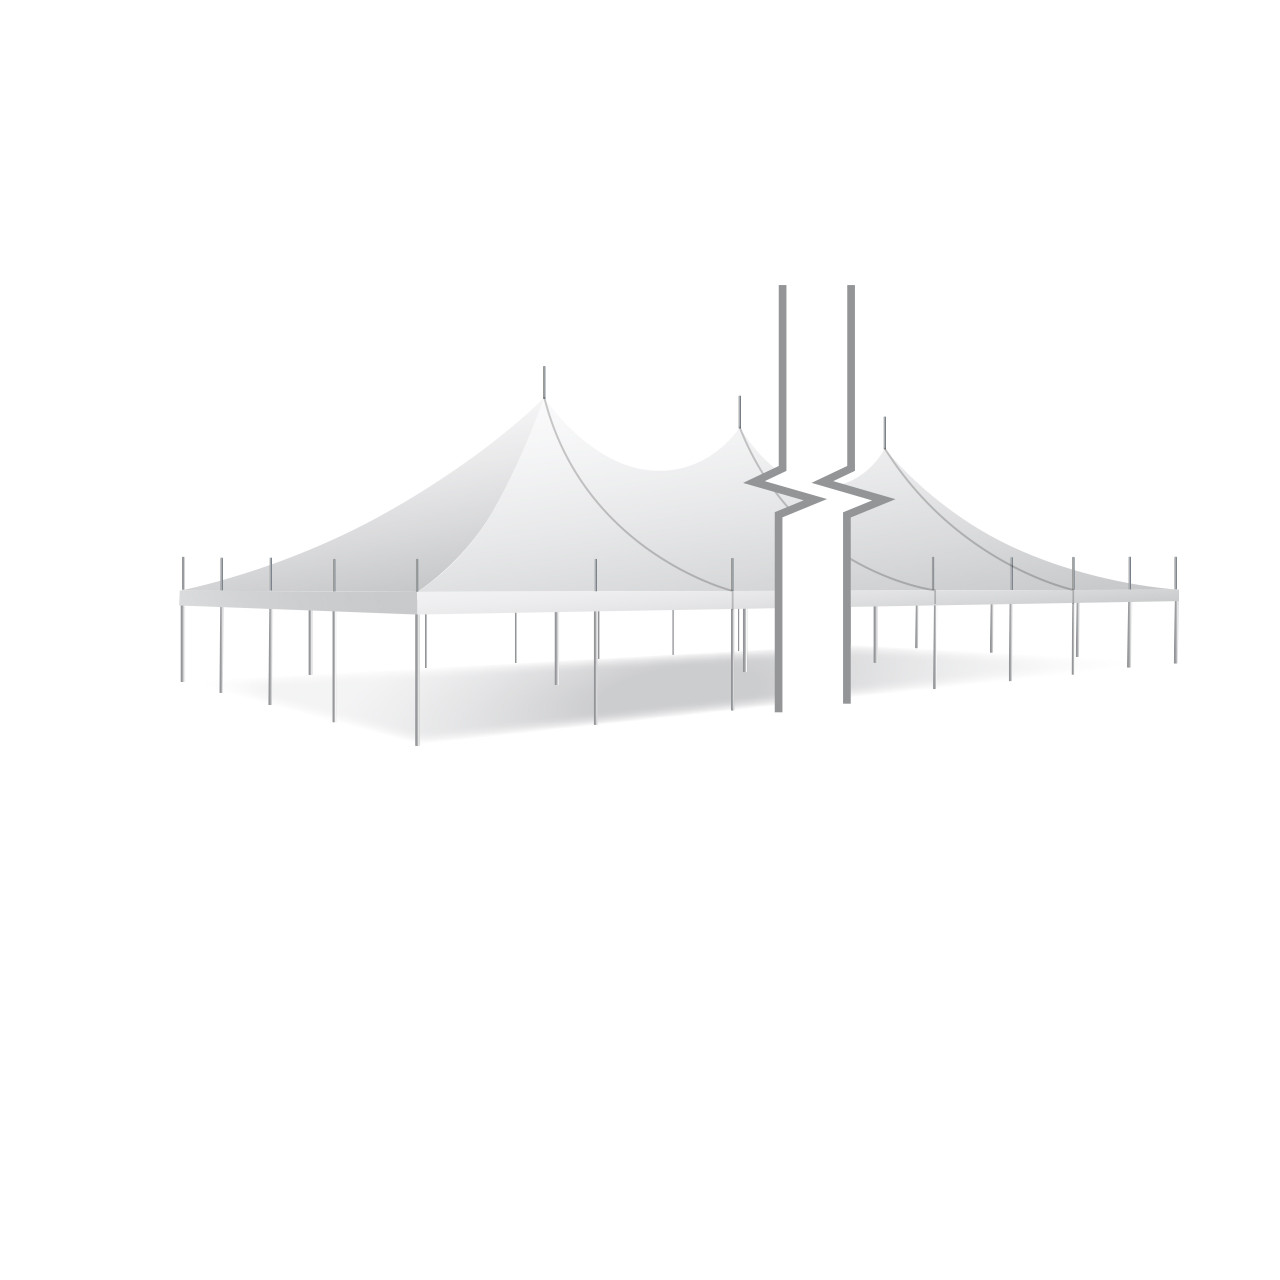 40' x 100' Premiere I Series High Peak Pole Tent, Sectional Tent Top, Complete